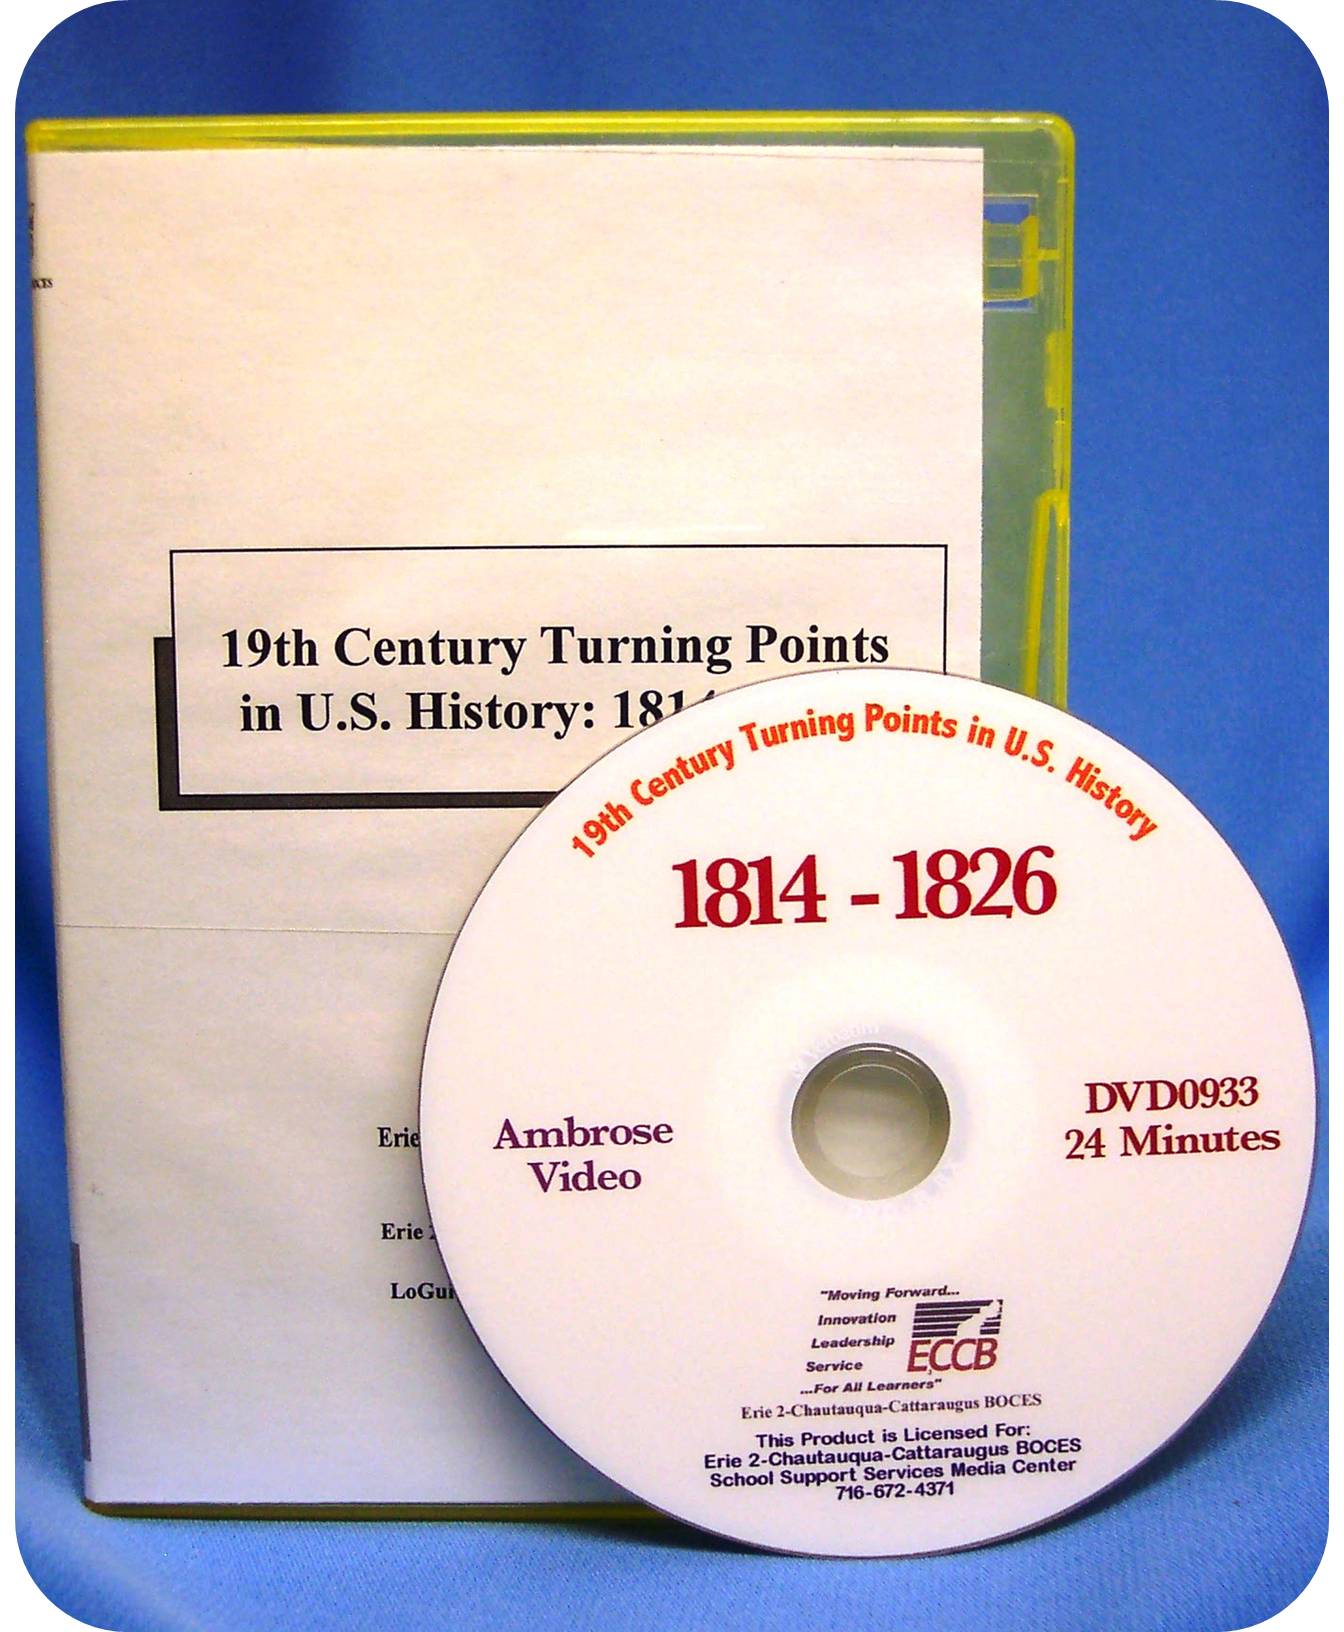 19th Century Turning Points in U.S. History: 1814 - 1826